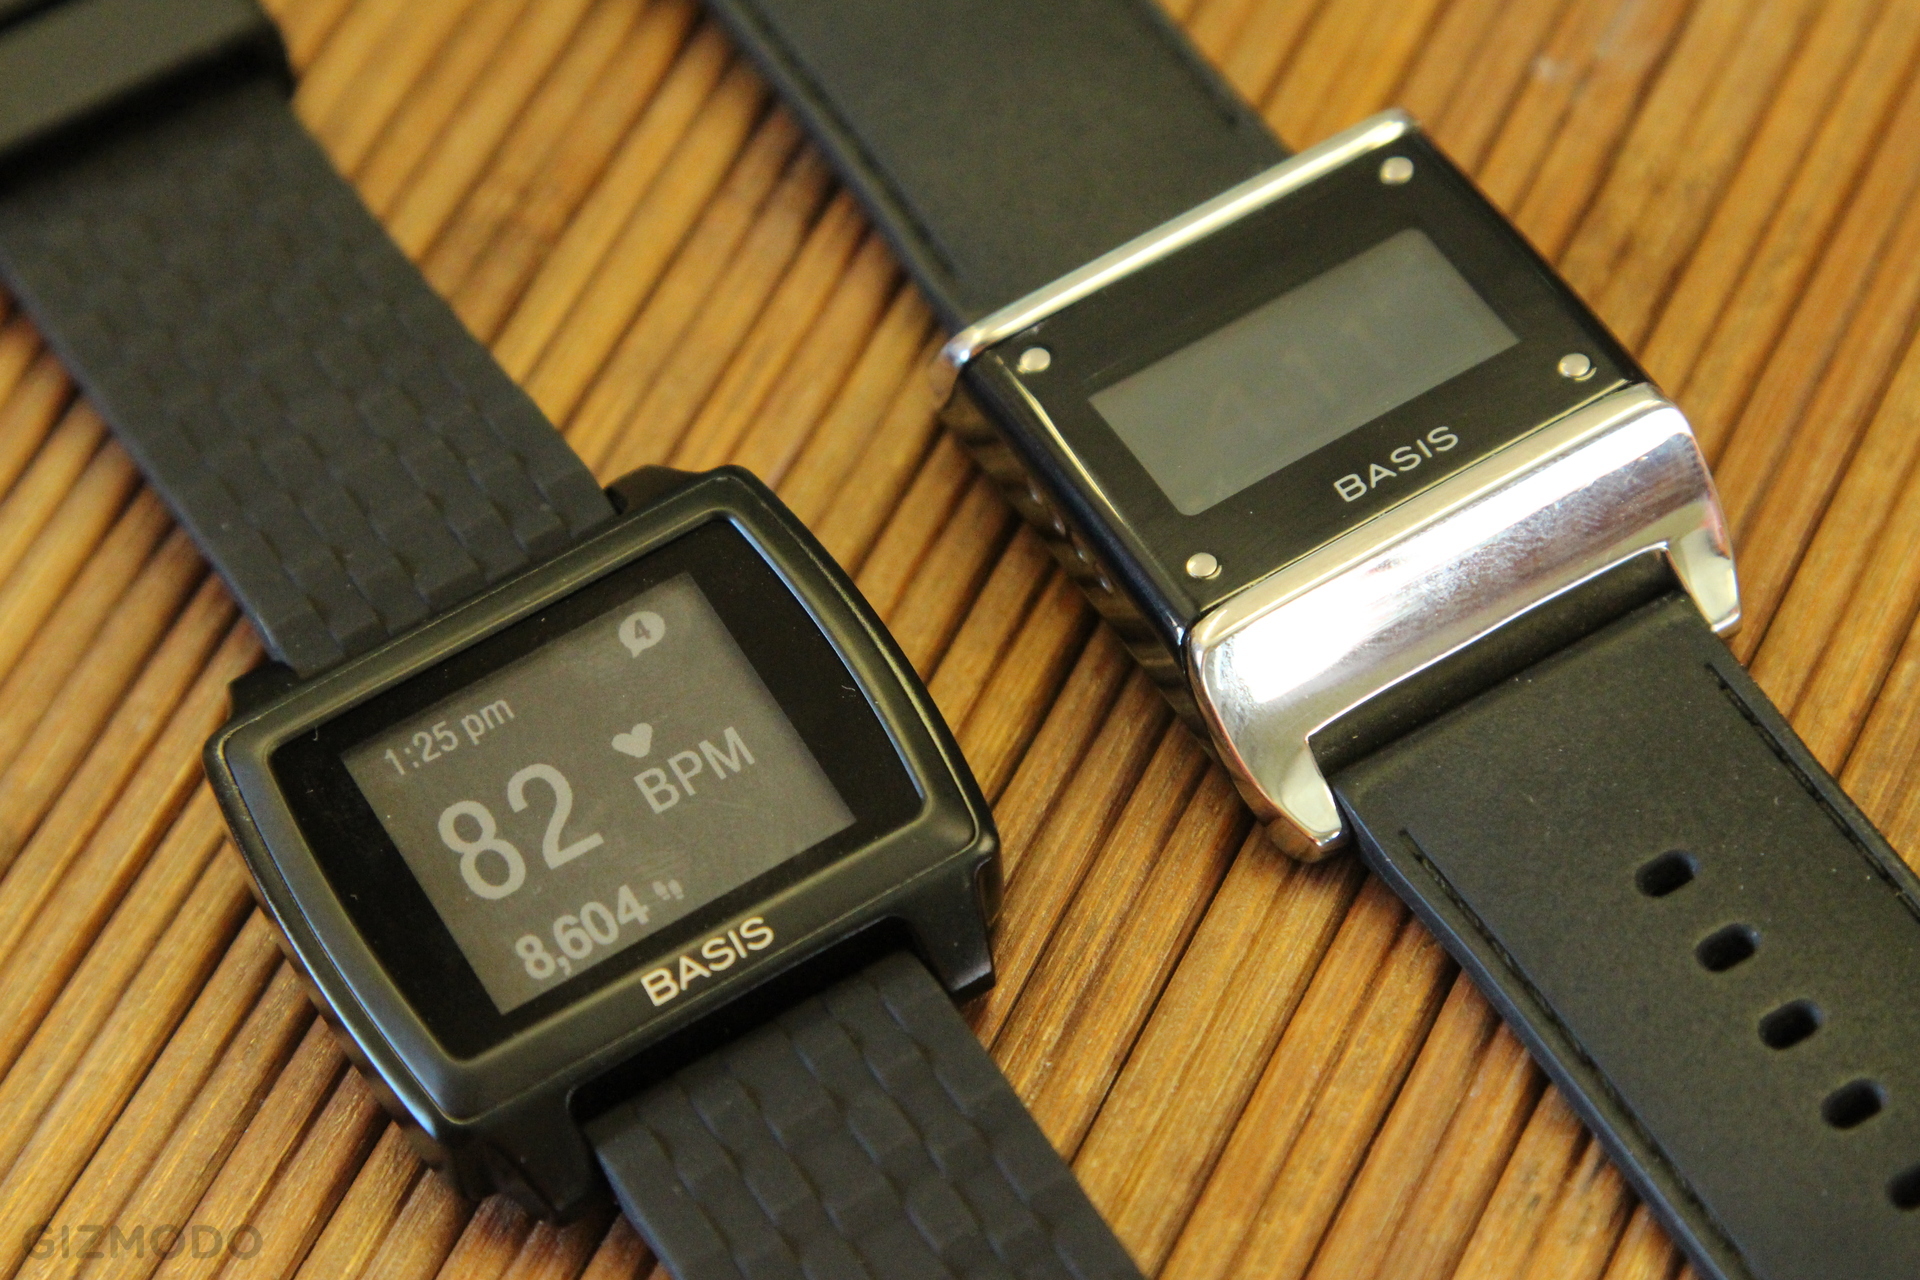 Basis Peak: A Powerful Fitness Tracker With Smartwatch Envy